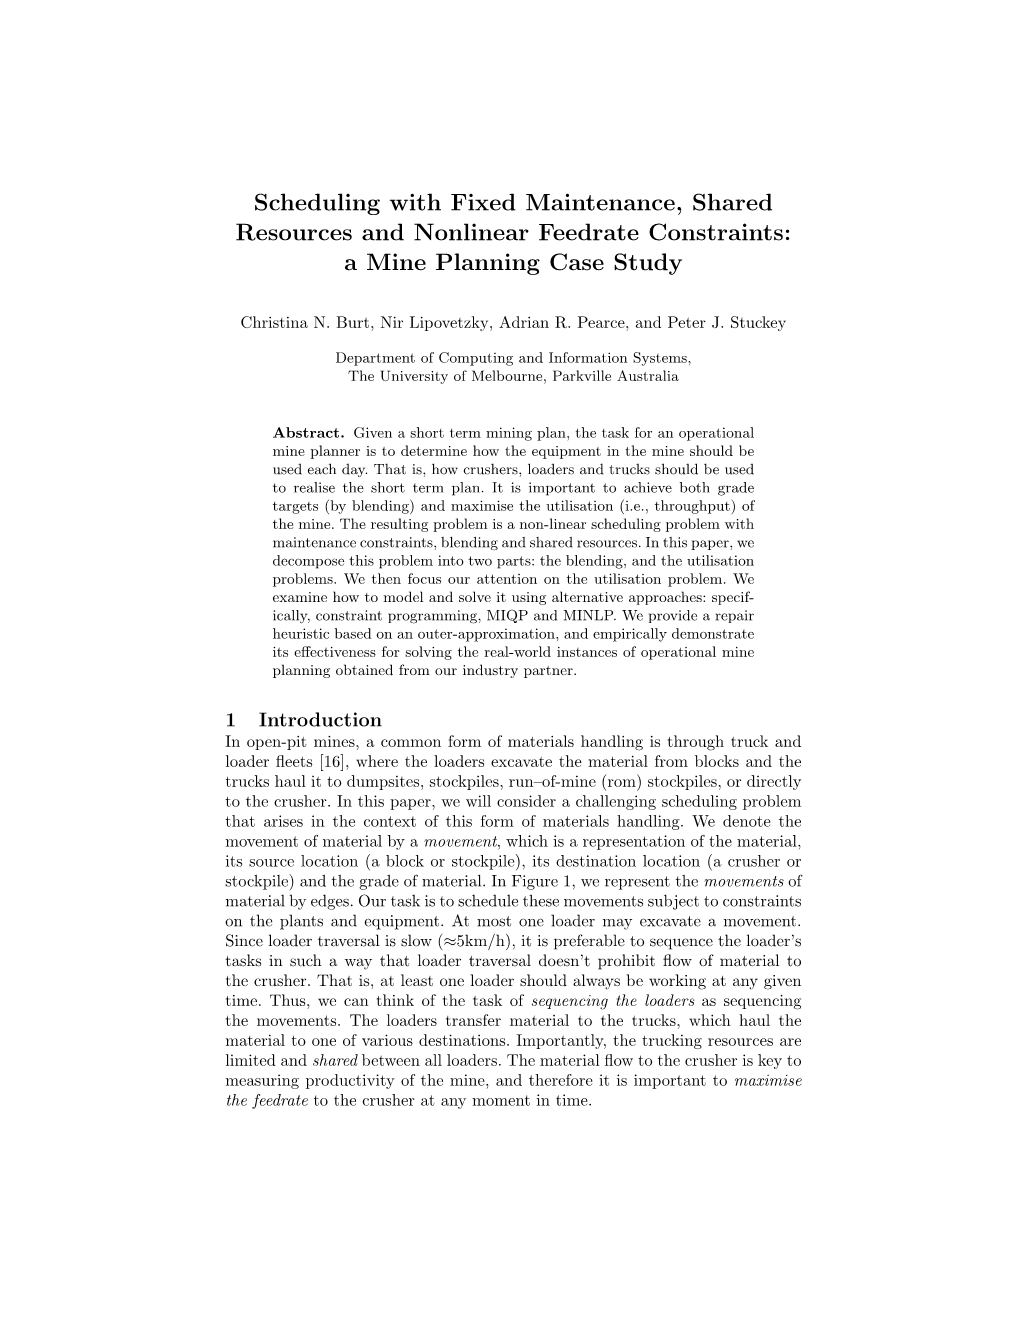 Scheduling with Fixed Maintenance, Shared Resources and Nonlinear Feedrate Constraints: a Mine Planning Case Study